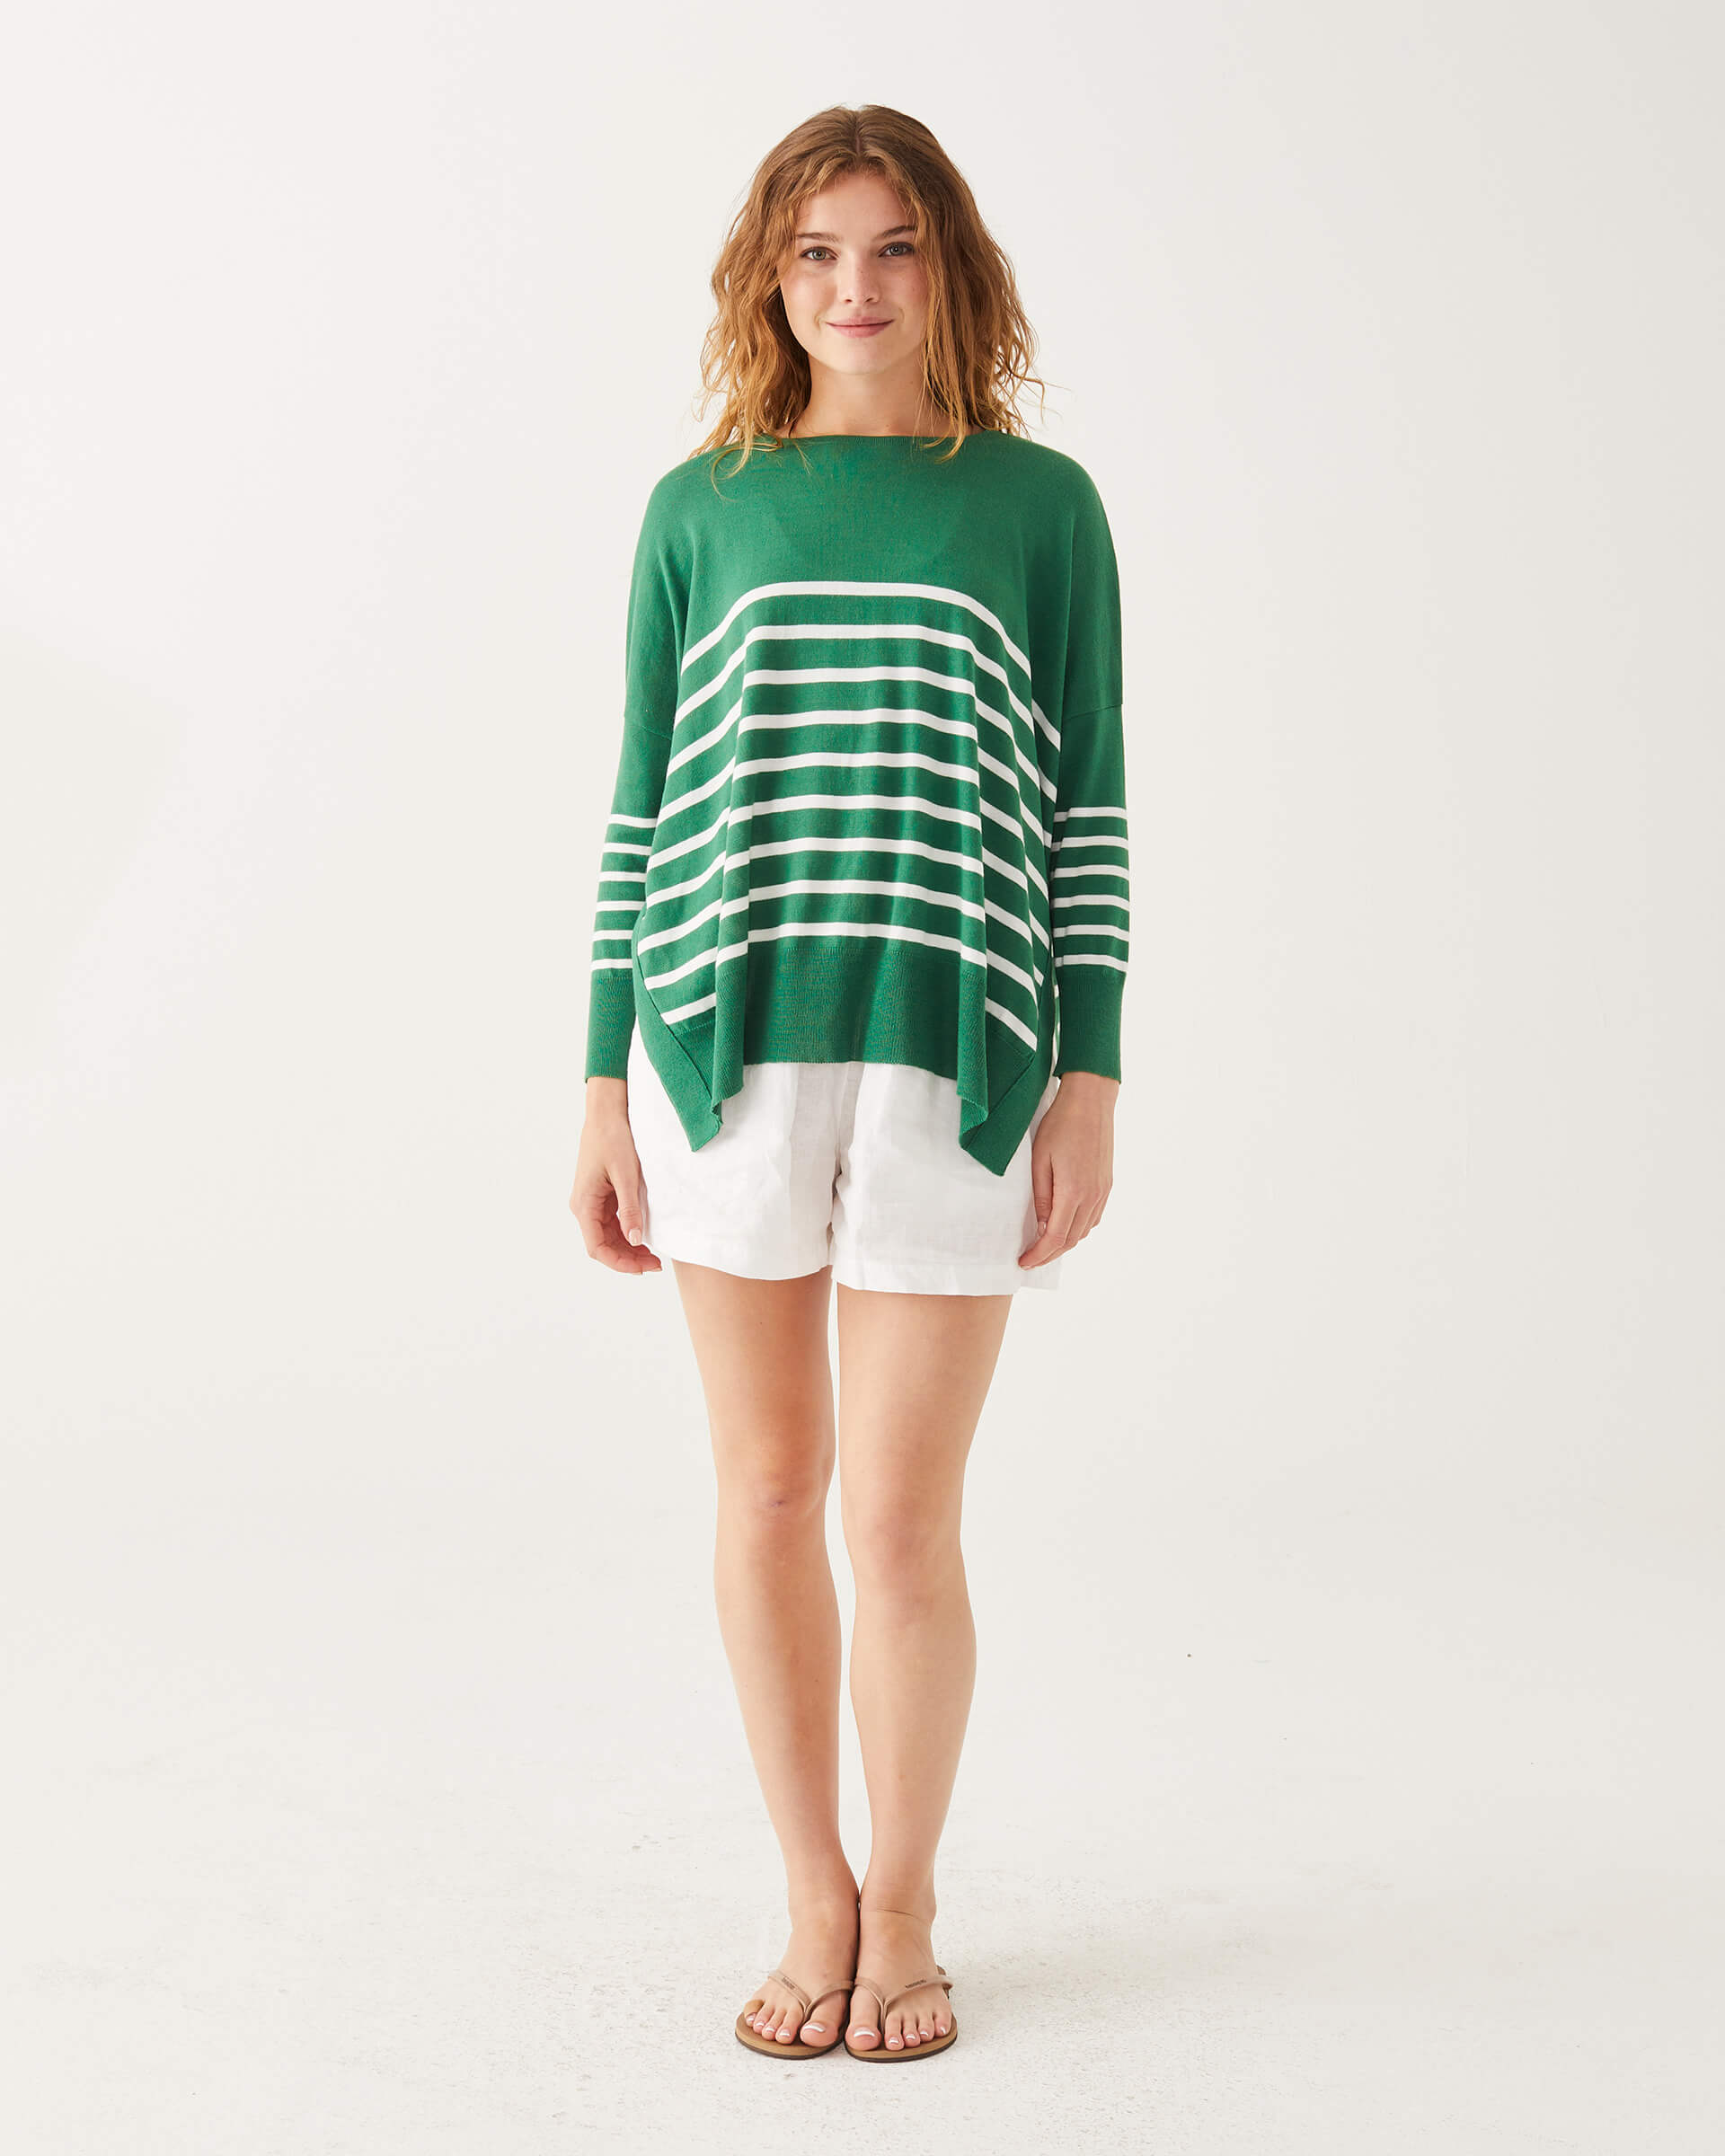 female wearing green and white striped sweater standing on a white background 